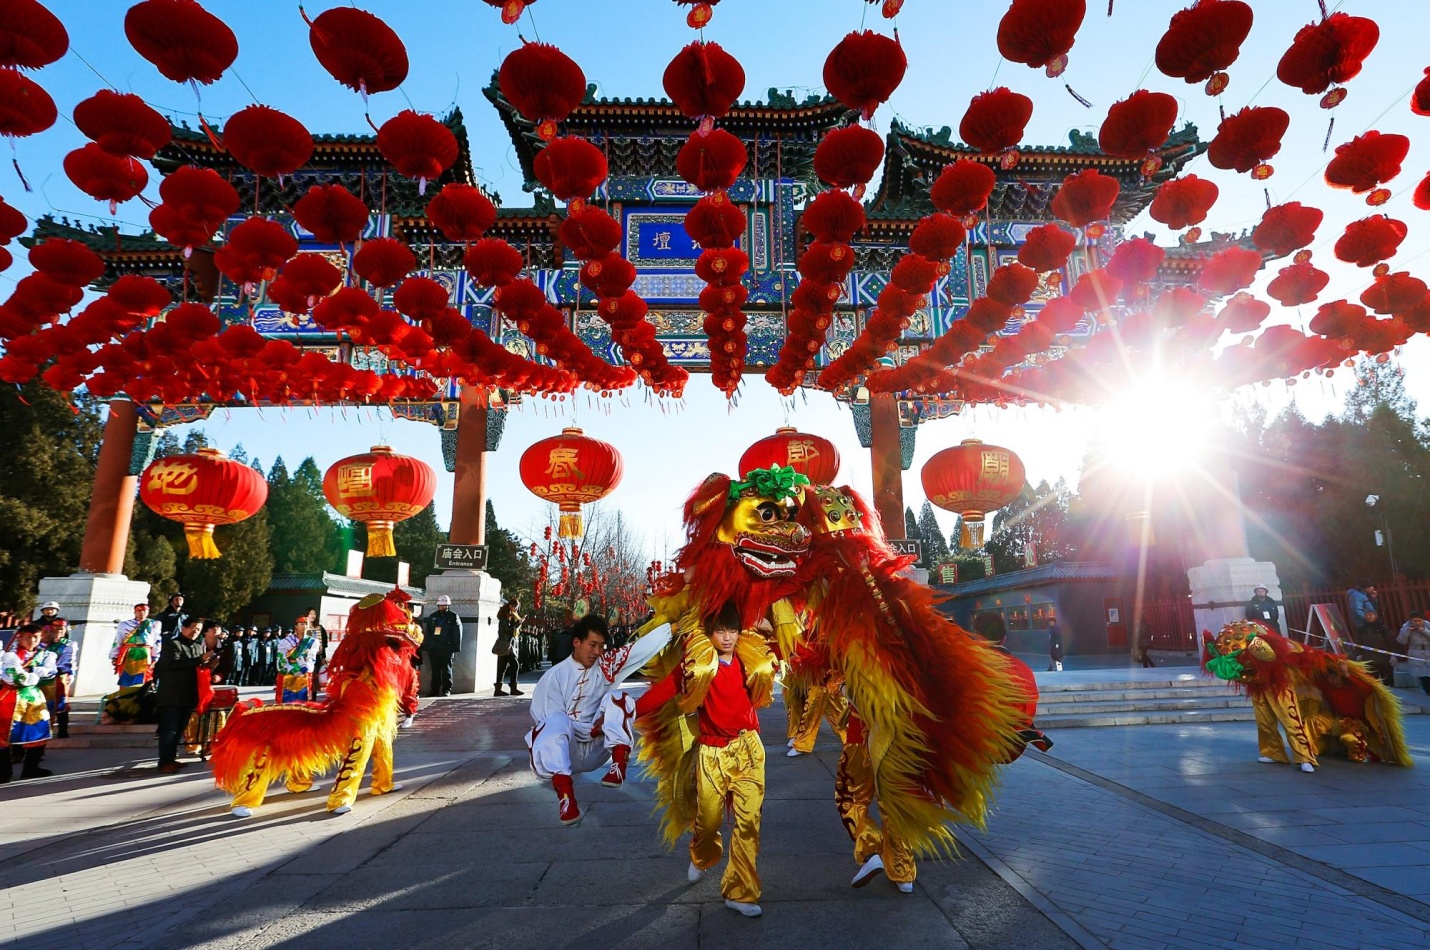 City Celebrations Chinese New Year 2015 In Pictures CITI I/O